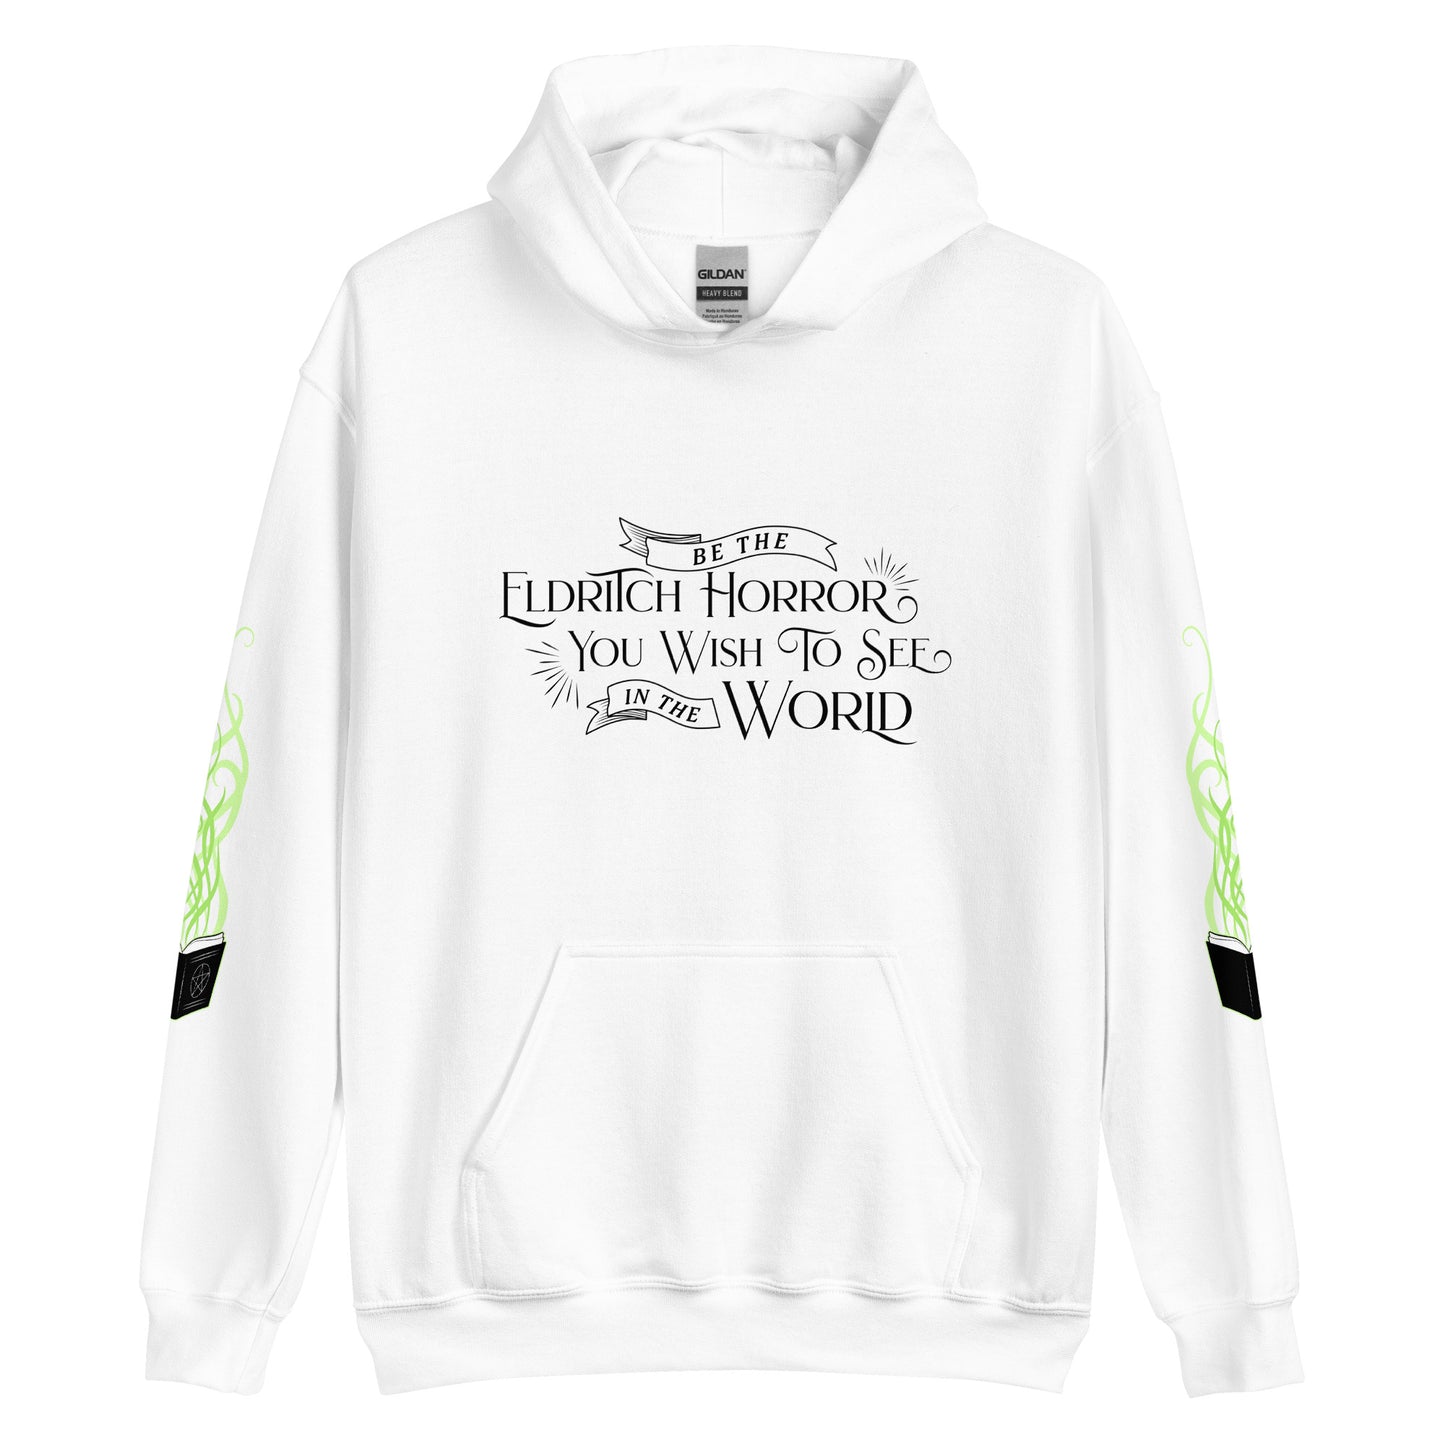 A white hooded sweatshirt featuring black text in an old-fashioned style on the chest. The text reads "Be the Eldritch Horror You Wish To See In The World". On each sleeve is an illustration of a black spellbook with green magical tendrils reaching upward from the pages.